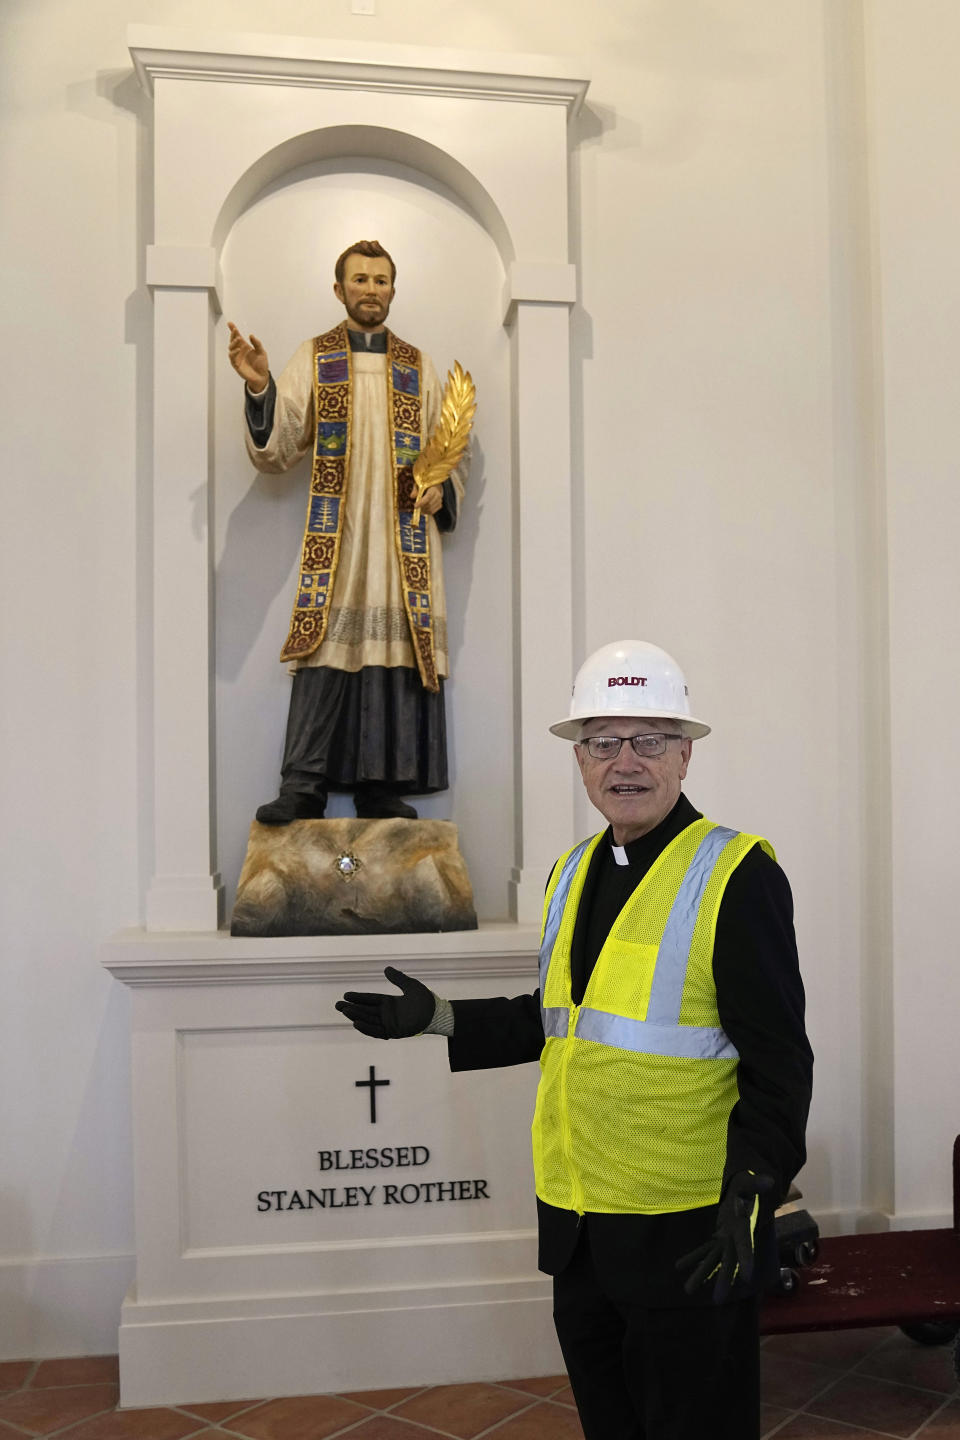 Rev. Don Wolf, a cousin of the Blessed Stanley Rother, stands by a statue of Rother in a chapel at the Blessed Stanley Rother Shrine, Thursday, Feb. 2, 2023, in Oklahoma City. Wolf will serve as the shrine's first rector. (AP Photo/Sue Ogrocki)